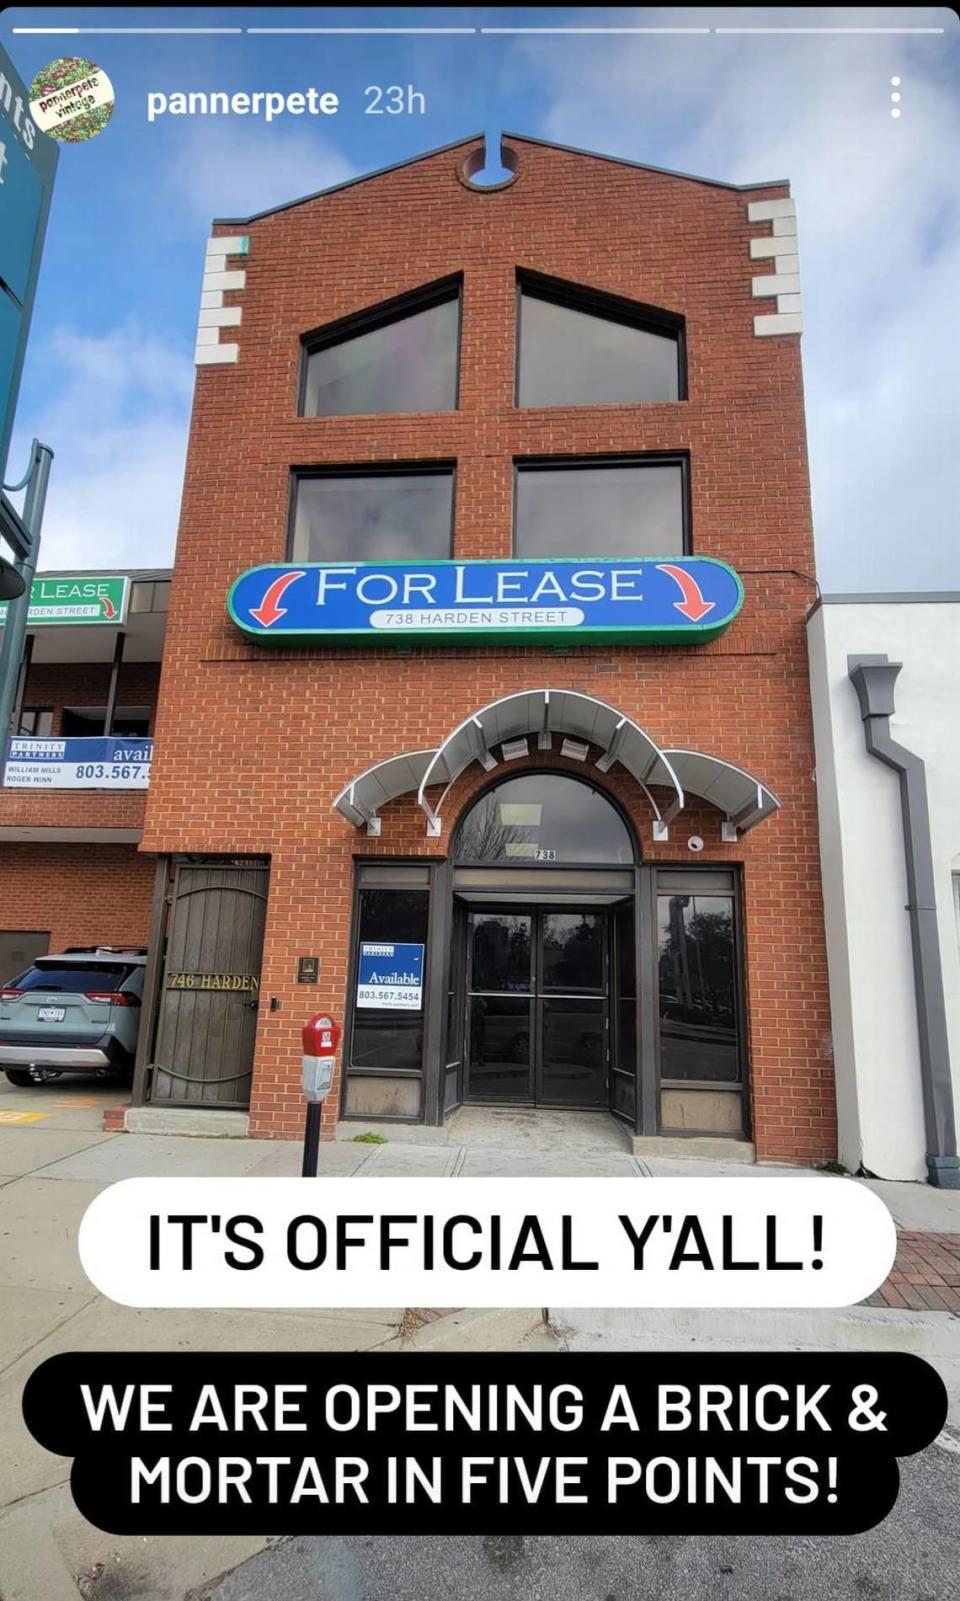 An Instagram story post from Pannerpete announces a brick-and-mortar location in Five Points.